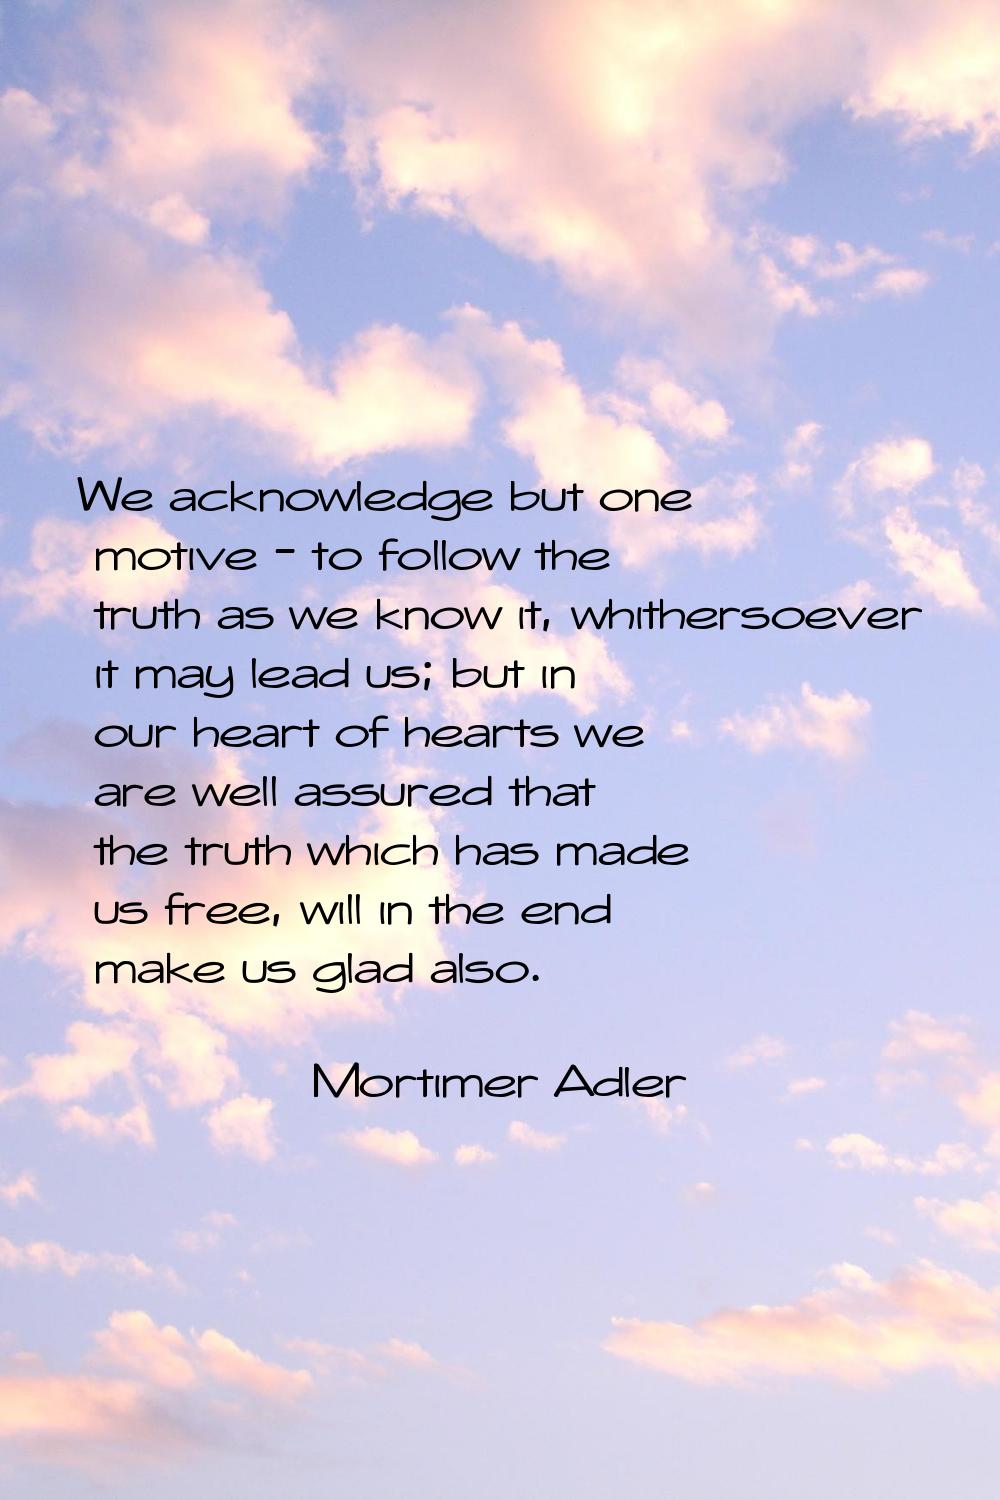 We acknowledge but one motive - to follow the truth as we know it, whithersoever it may lead us; bu